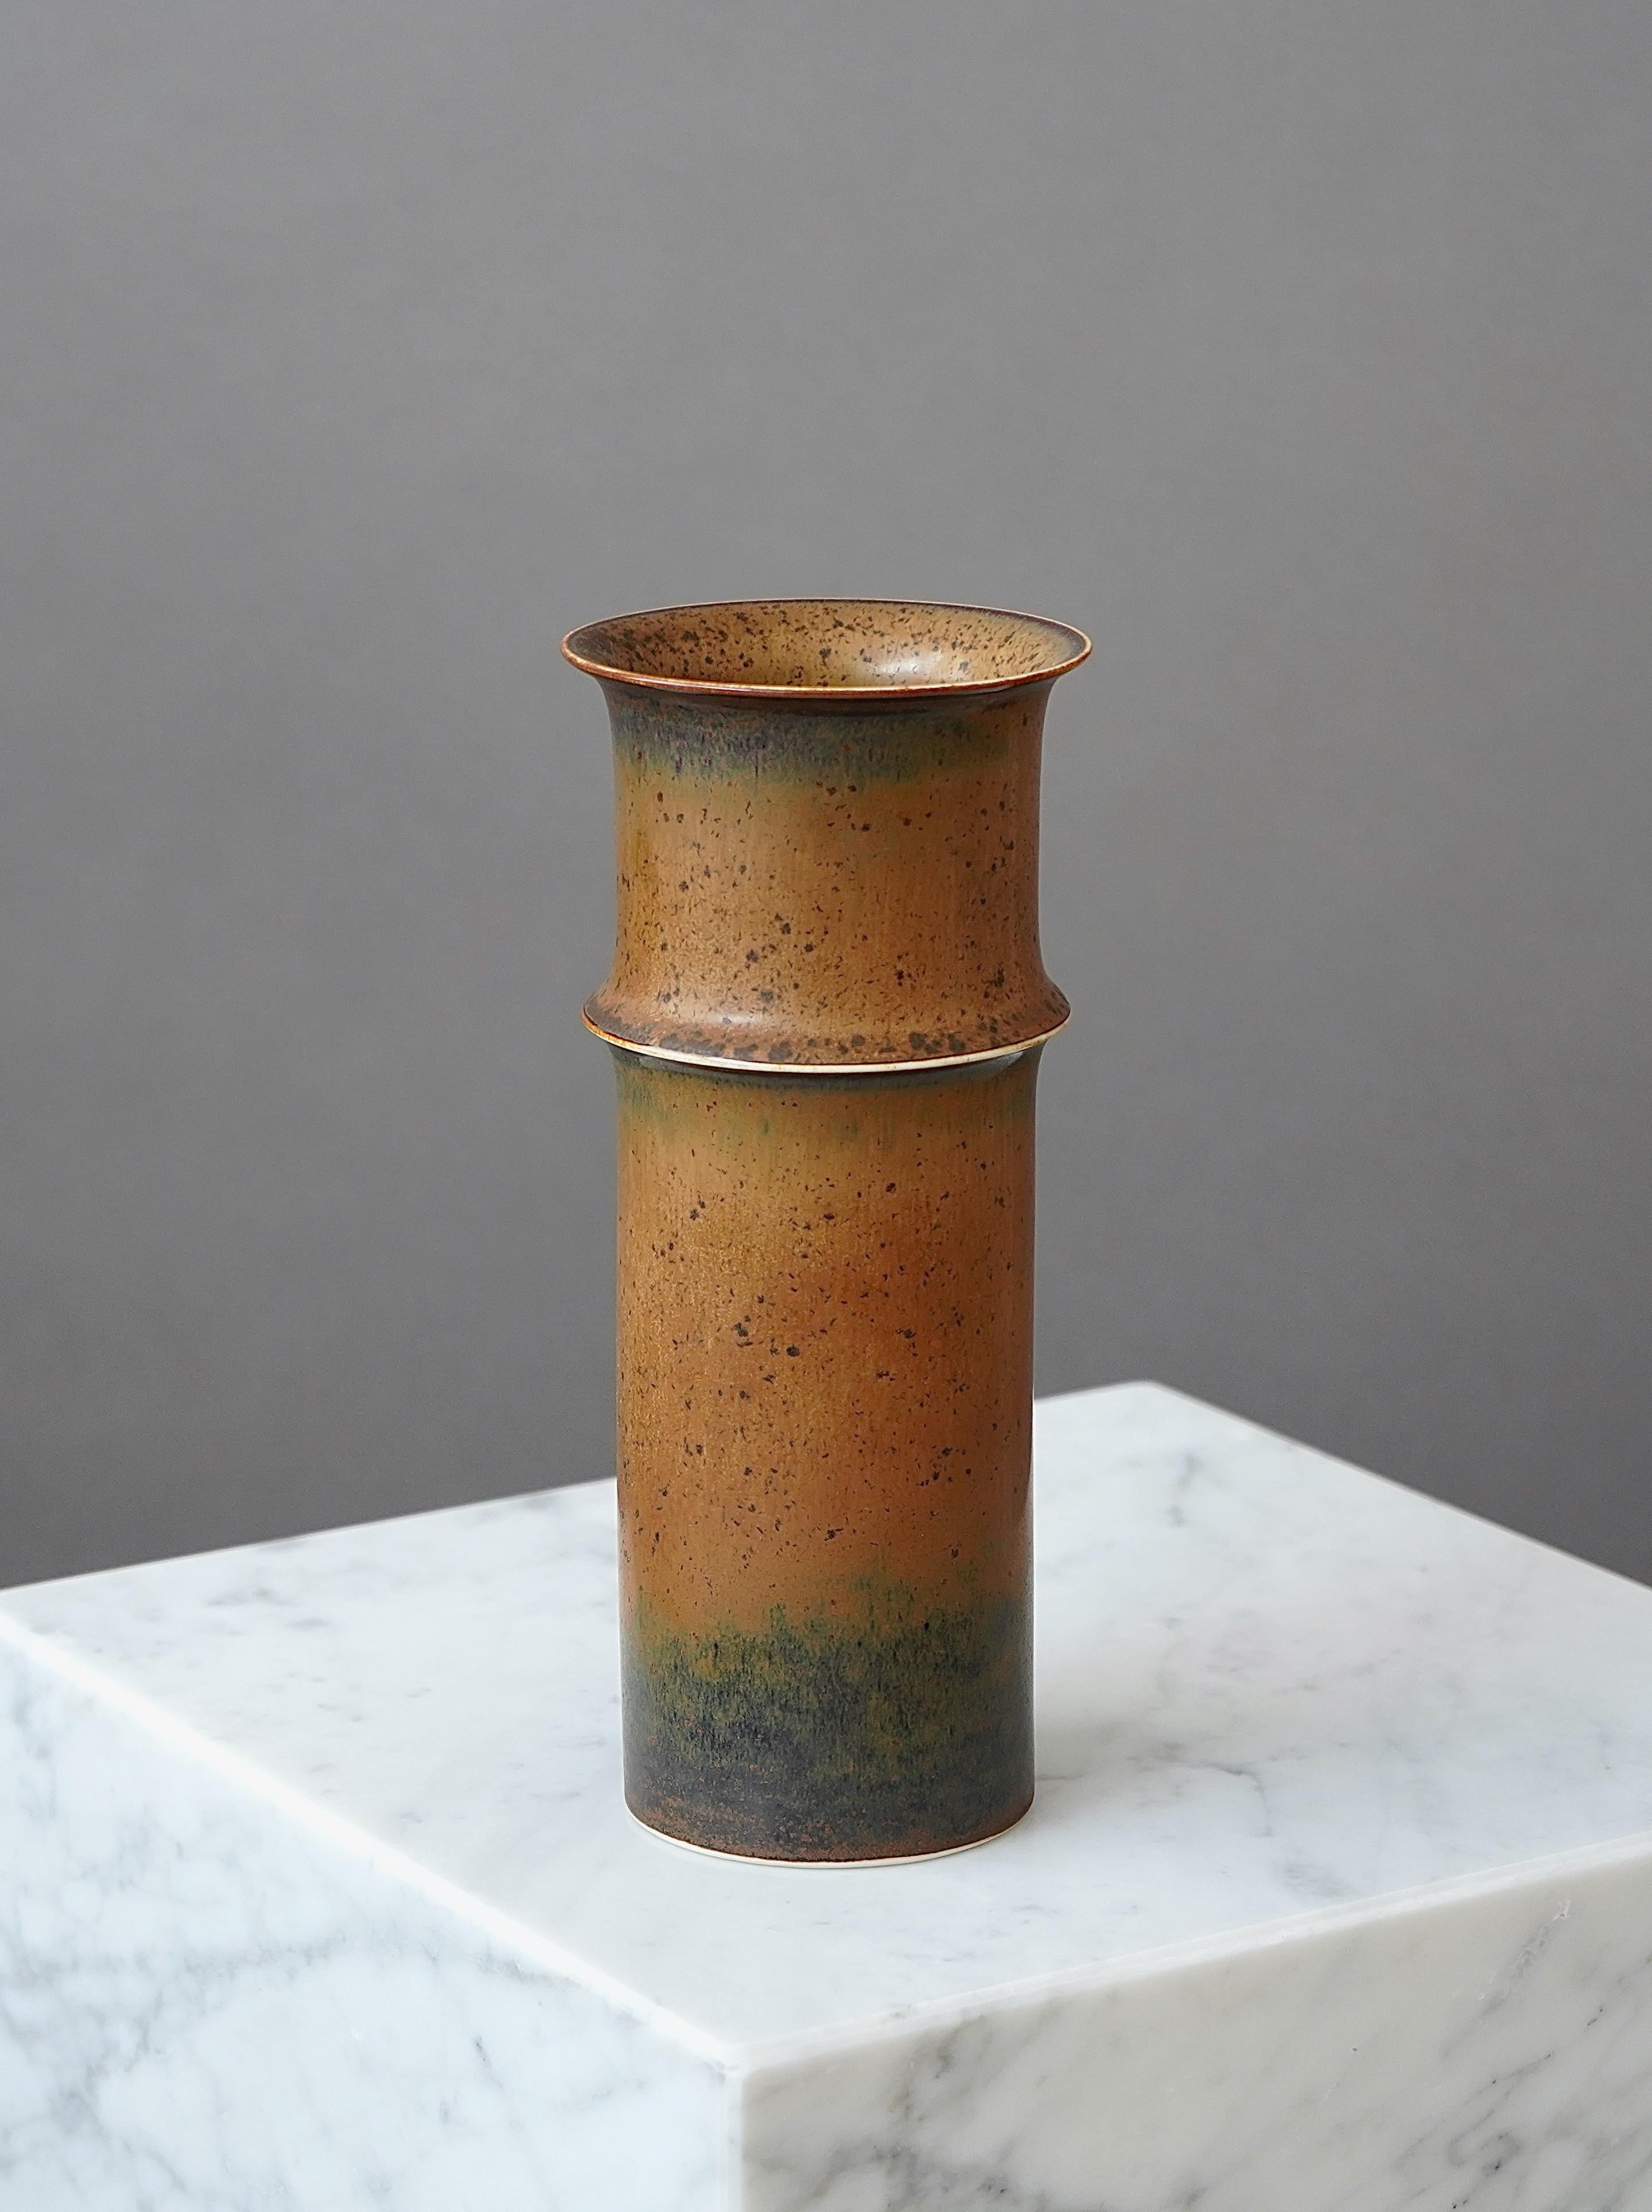 A beautiful stoneware vase with amazing glaze.
Made by Stig Lindberg in Gustavsberg Studio, Sweden. 1950s. 

Excellent condition. 
Impressed 